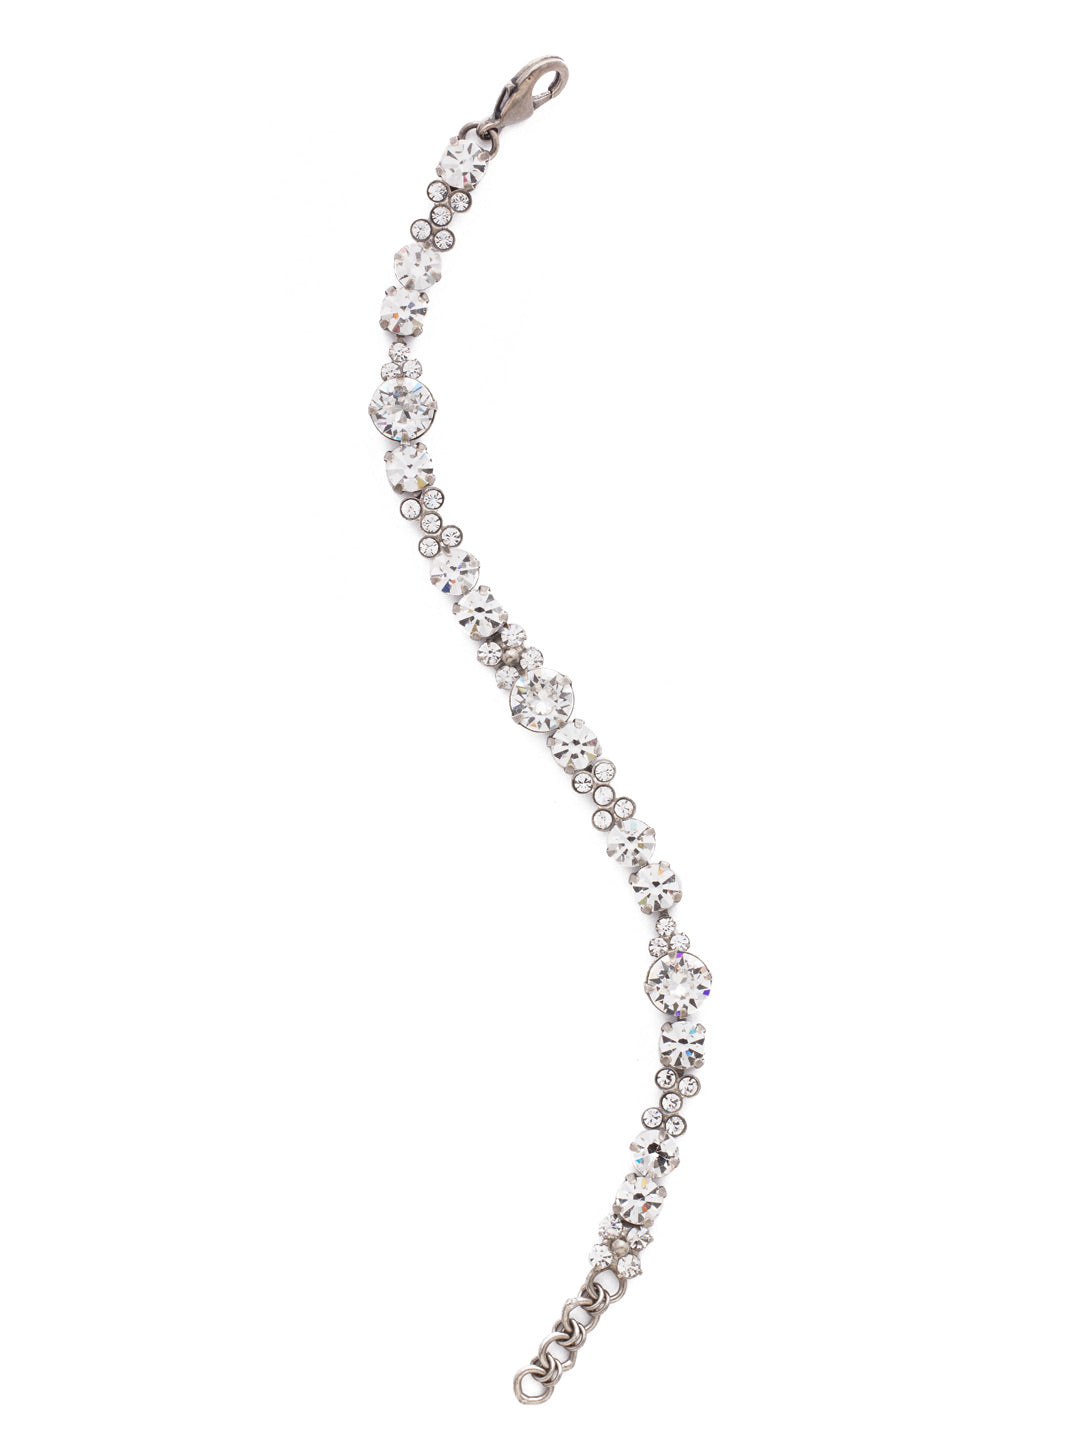 Well-Rounded Bracelet - BDK10ASCRY - <p>Large circular gems form a centerpiece for more dainty and delicate round cut crystals on a classic line frame. From Sorrelli's Crystal collection in our Antique Silver-tone finish.</p>